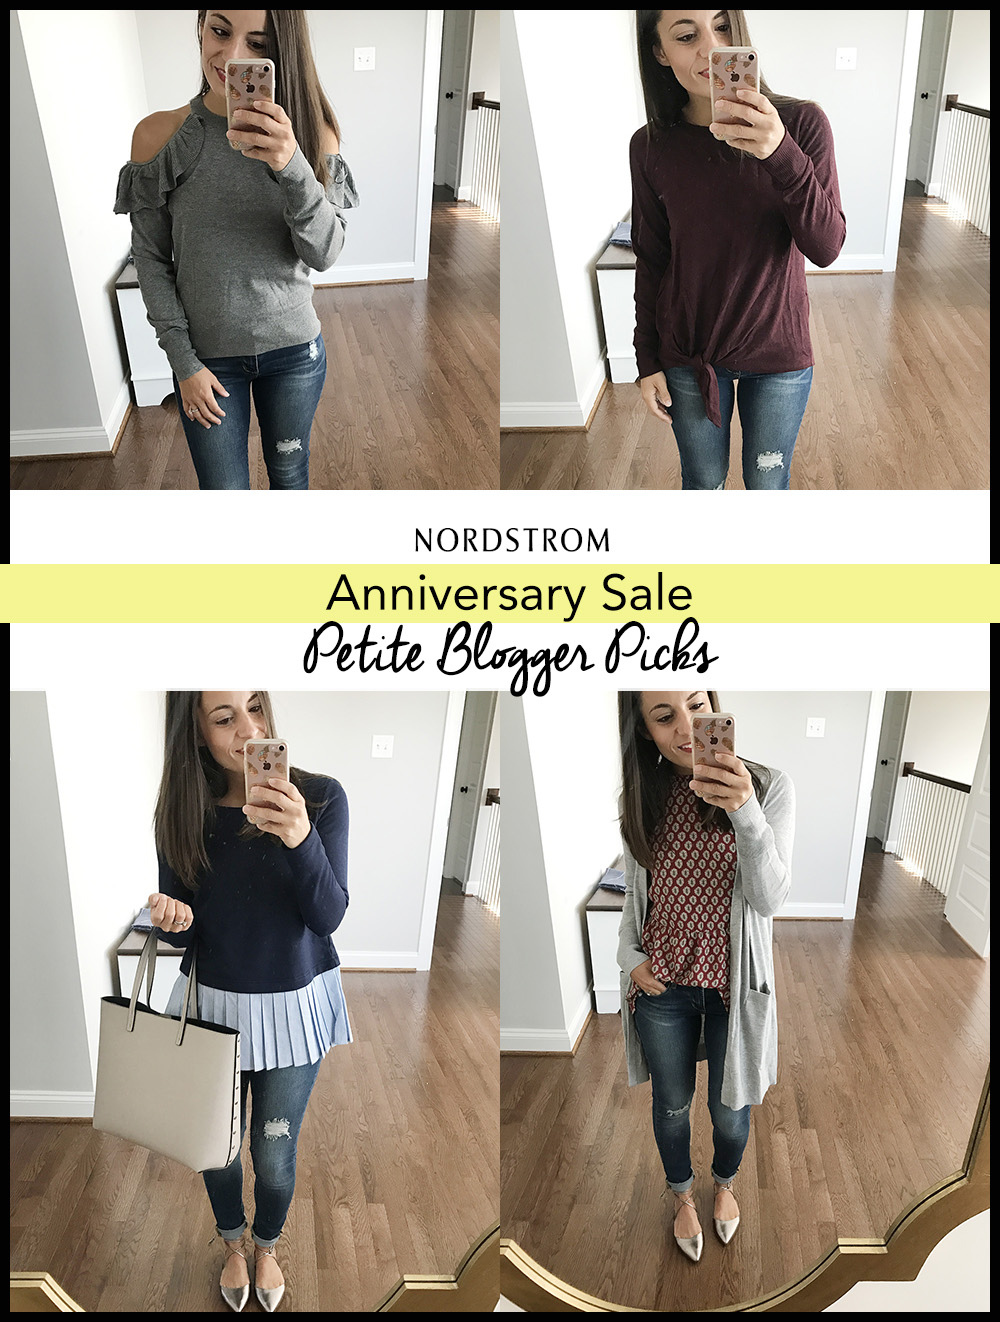 Top 10 Must-Haves from the Nordstrom Anniversary Sale - Outfit Formulas®